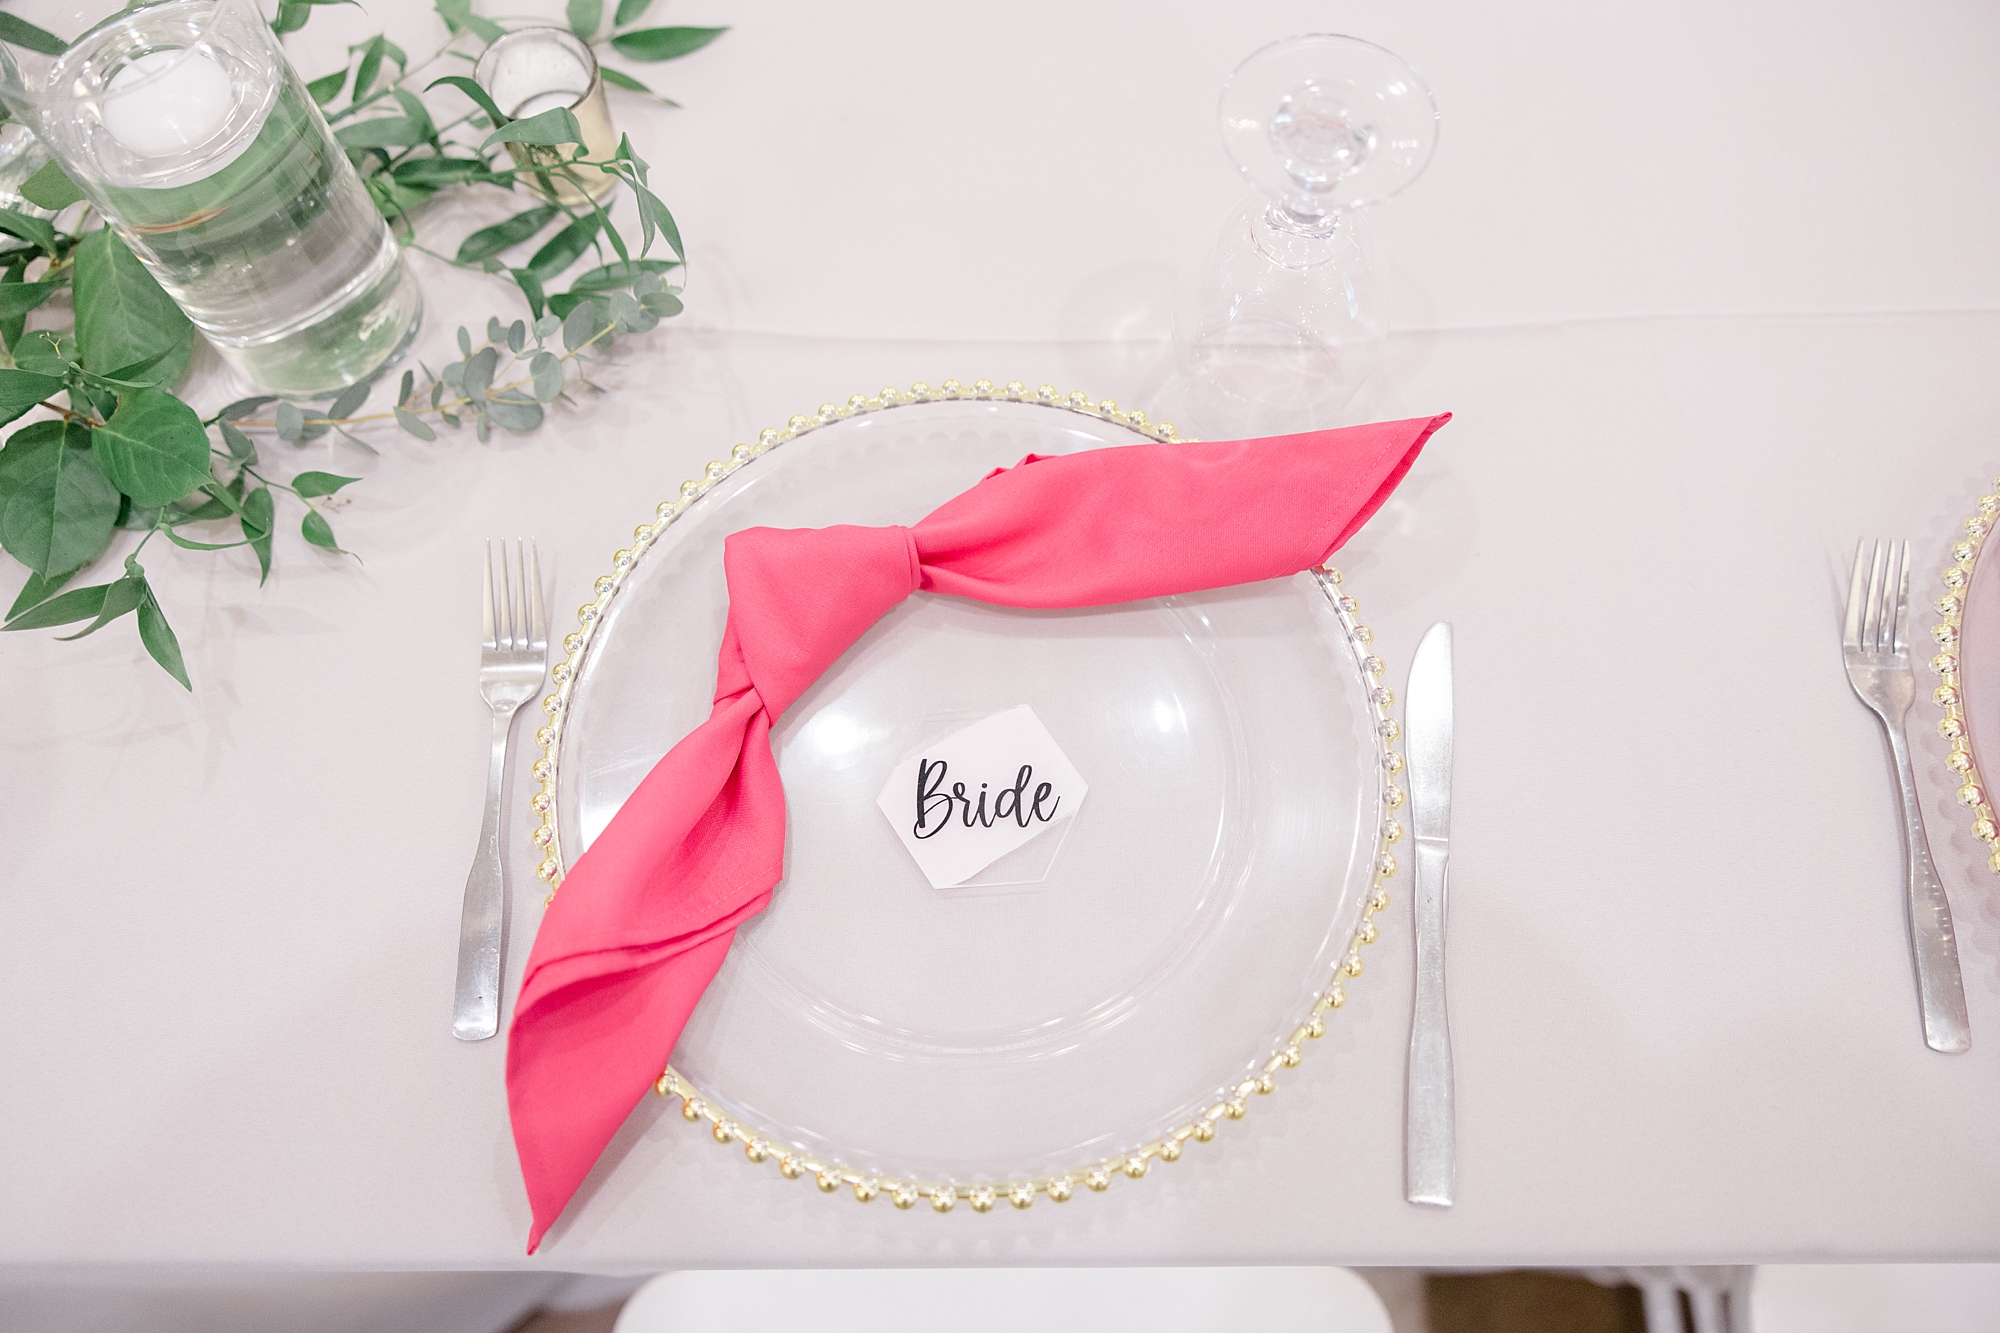 place setting with pink napkin and gold rimmed plate